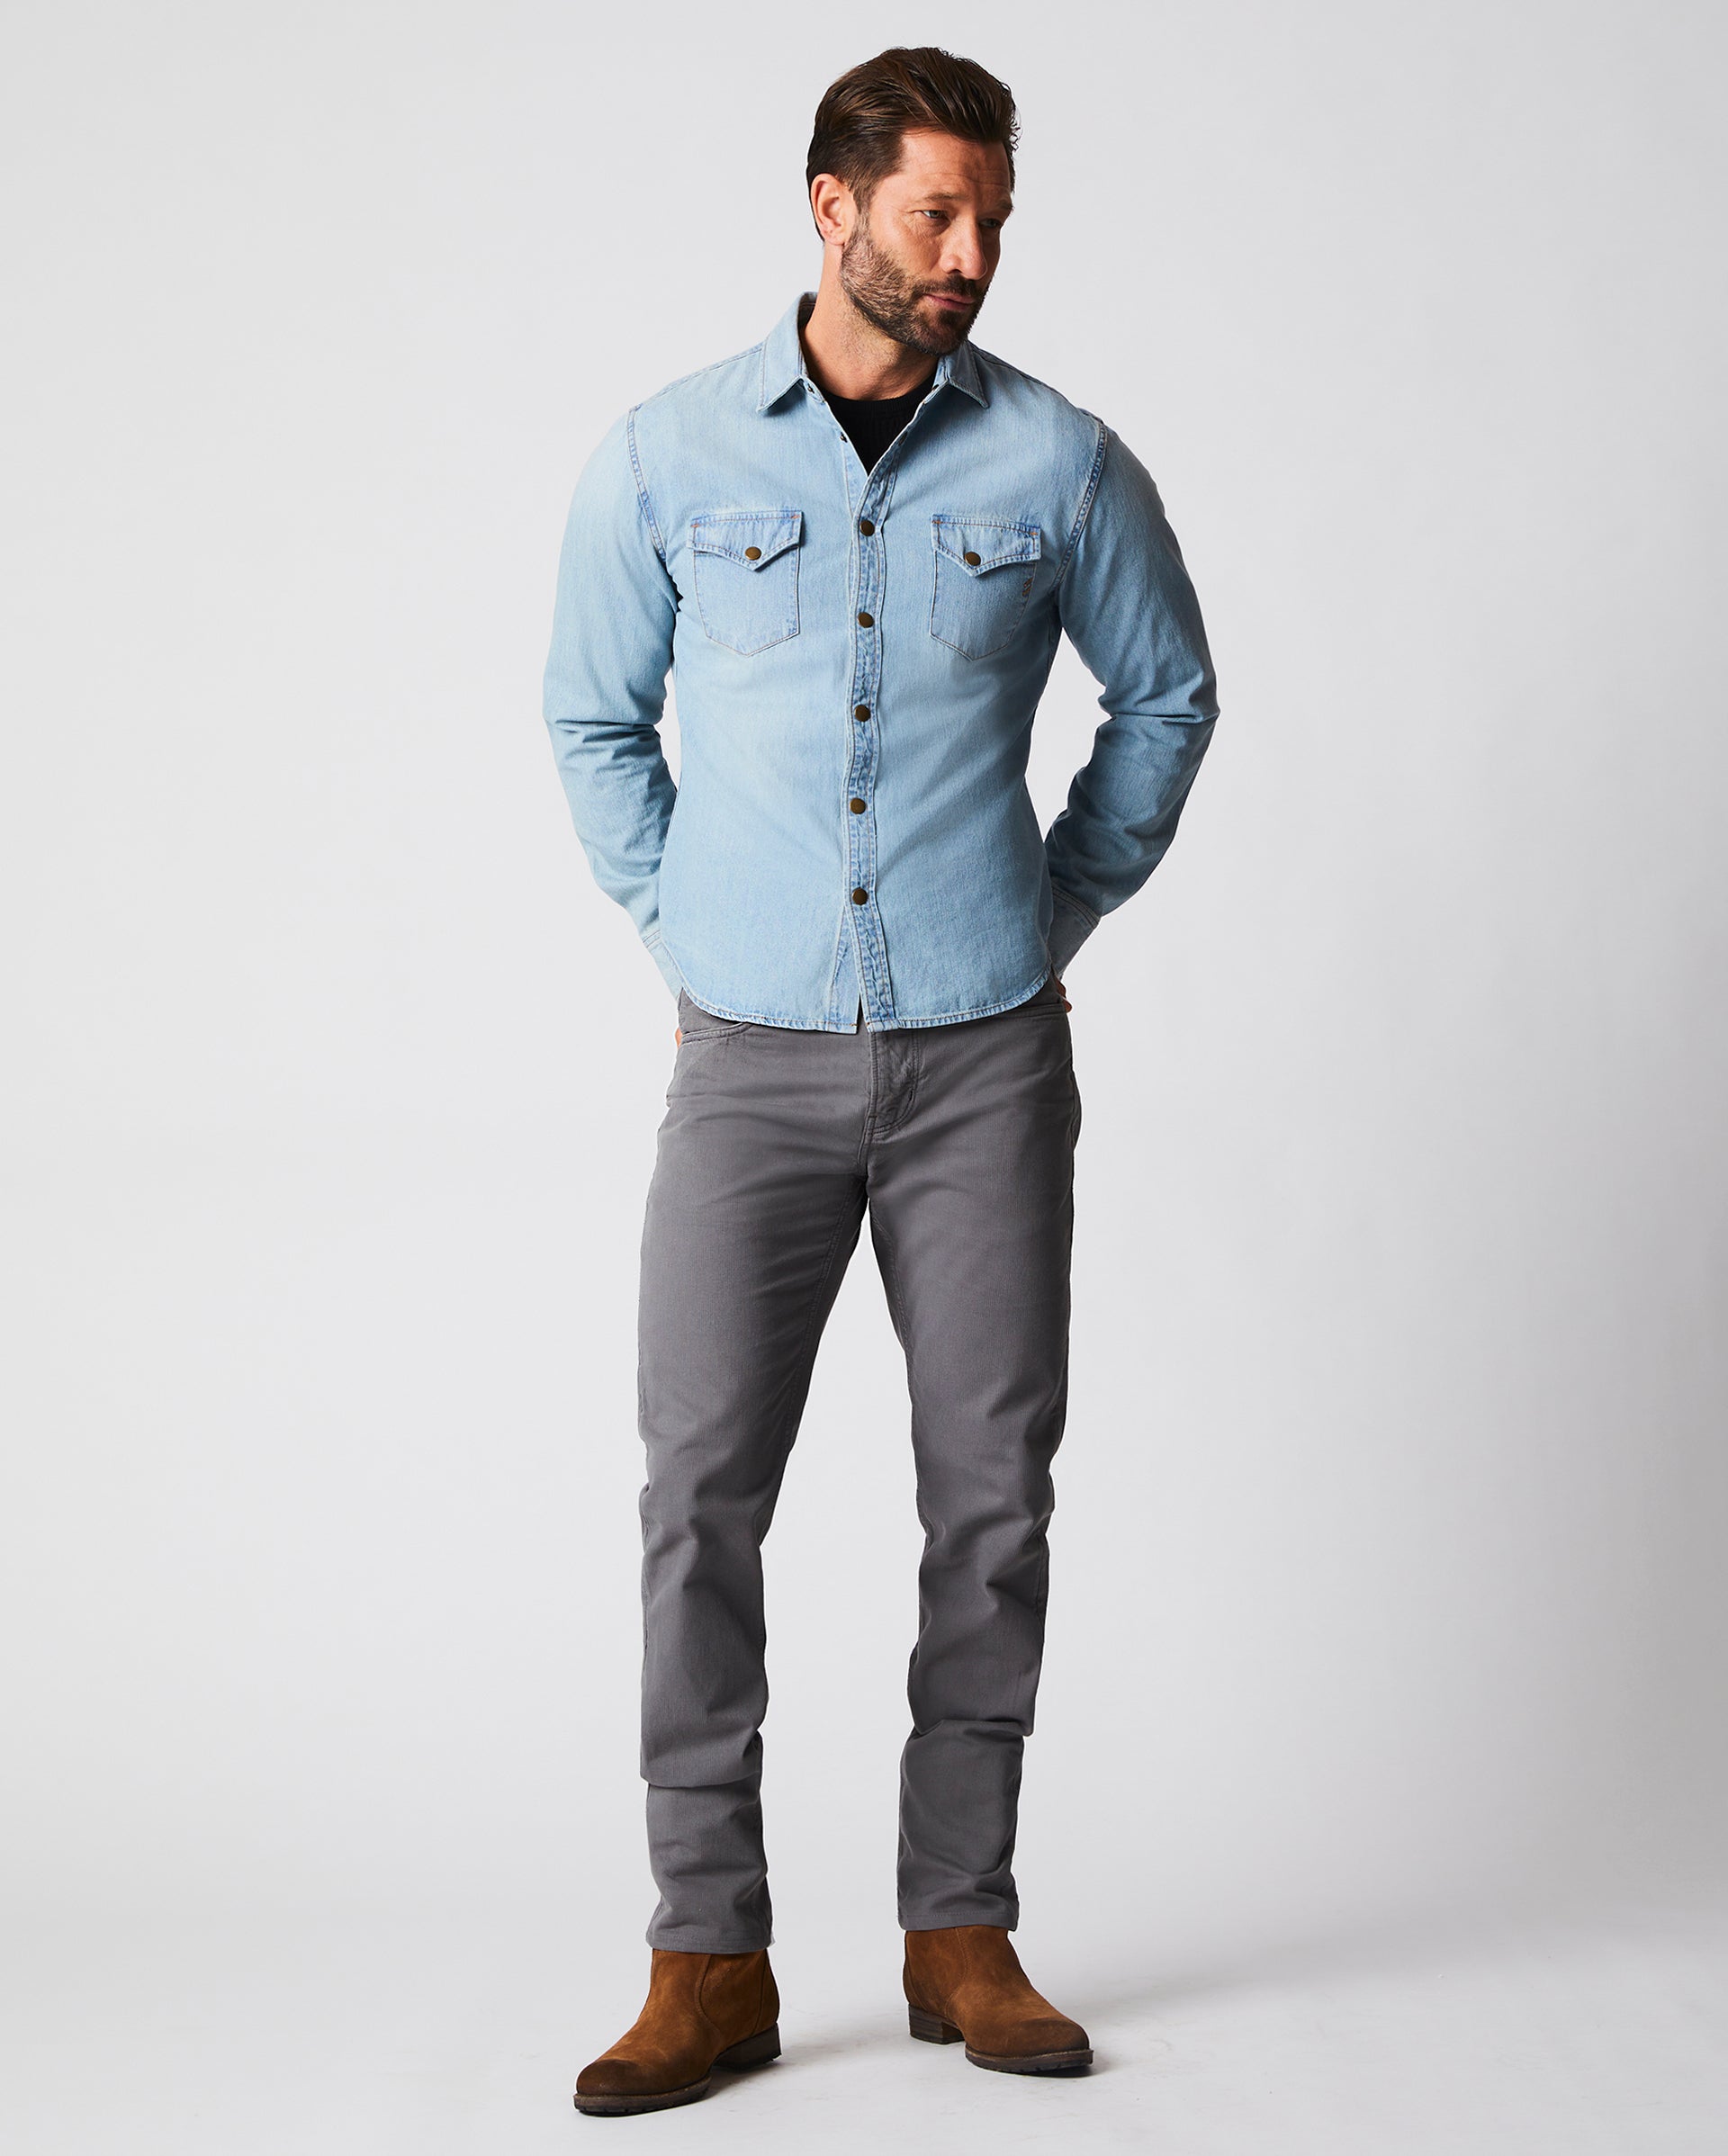 Wearjump - What pants go with a denim shirt men? Ideally you want different  shades of denim on top and bottom. That means black jeans and dark blue  denim shirt, white jeans